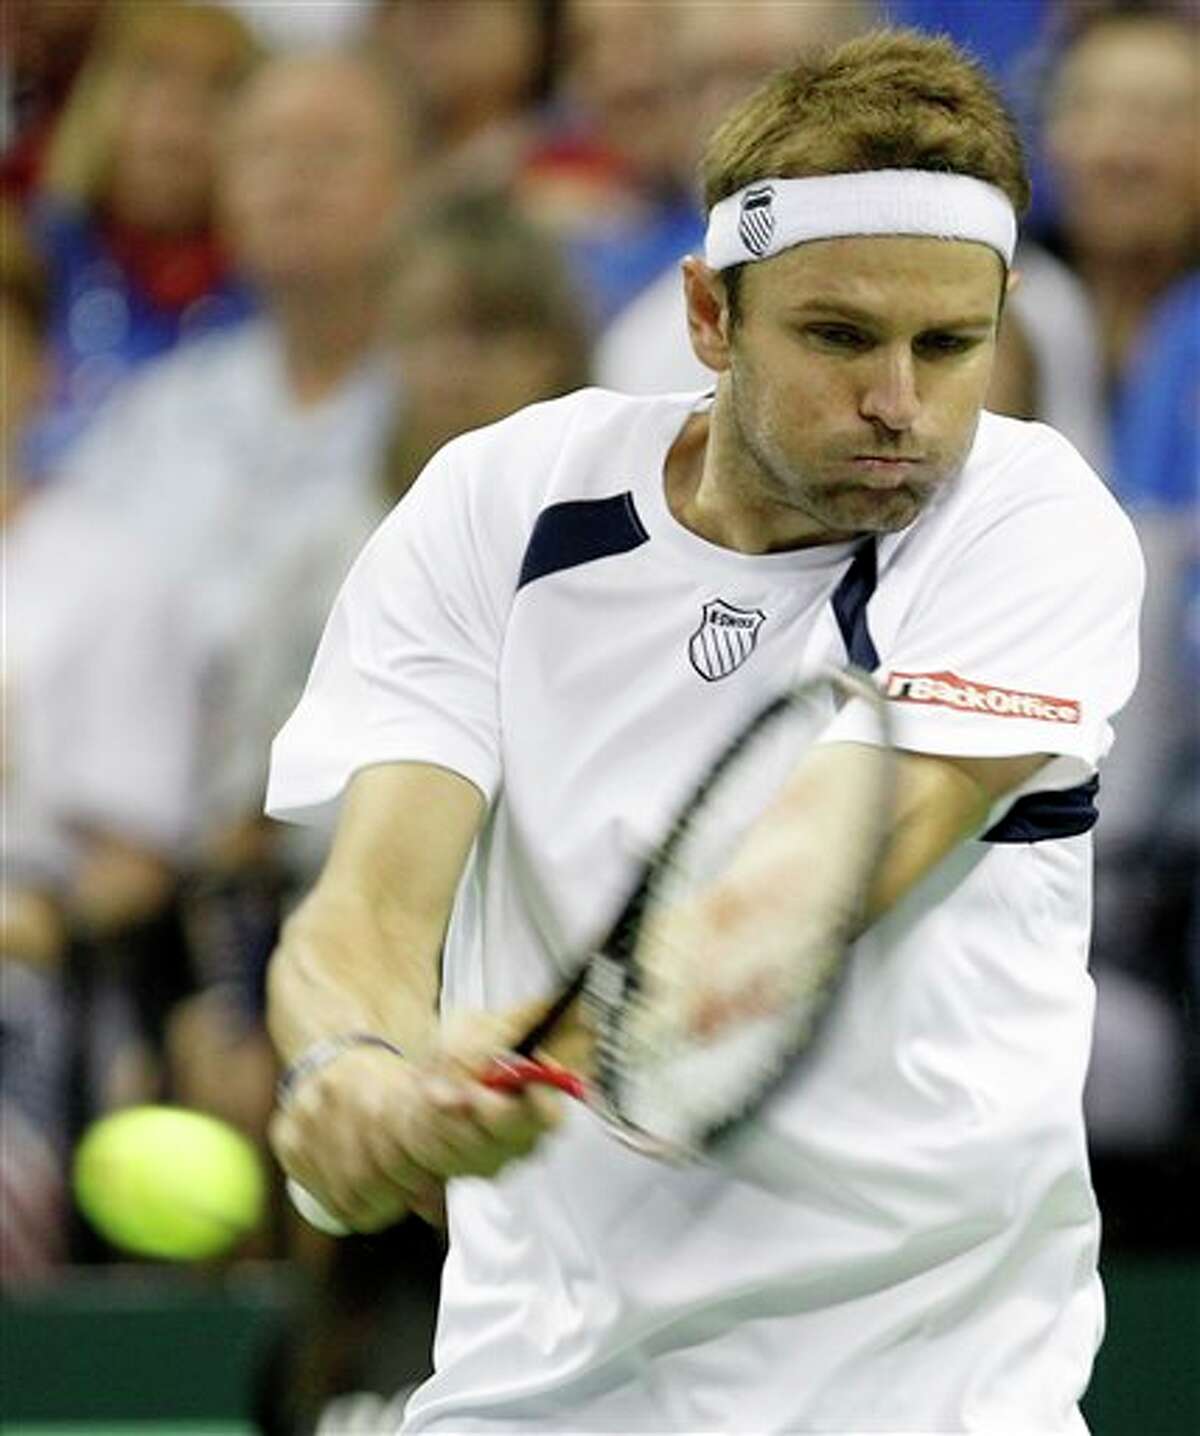 Mardy Fish of the U.S. returns the ball to Feliciano Lopez of Spain during a game in the Davis Cup quarterfinal tennis match, Friday, July 8, 2011, in Austin, Texas. (AP Photo/Eric Gay)